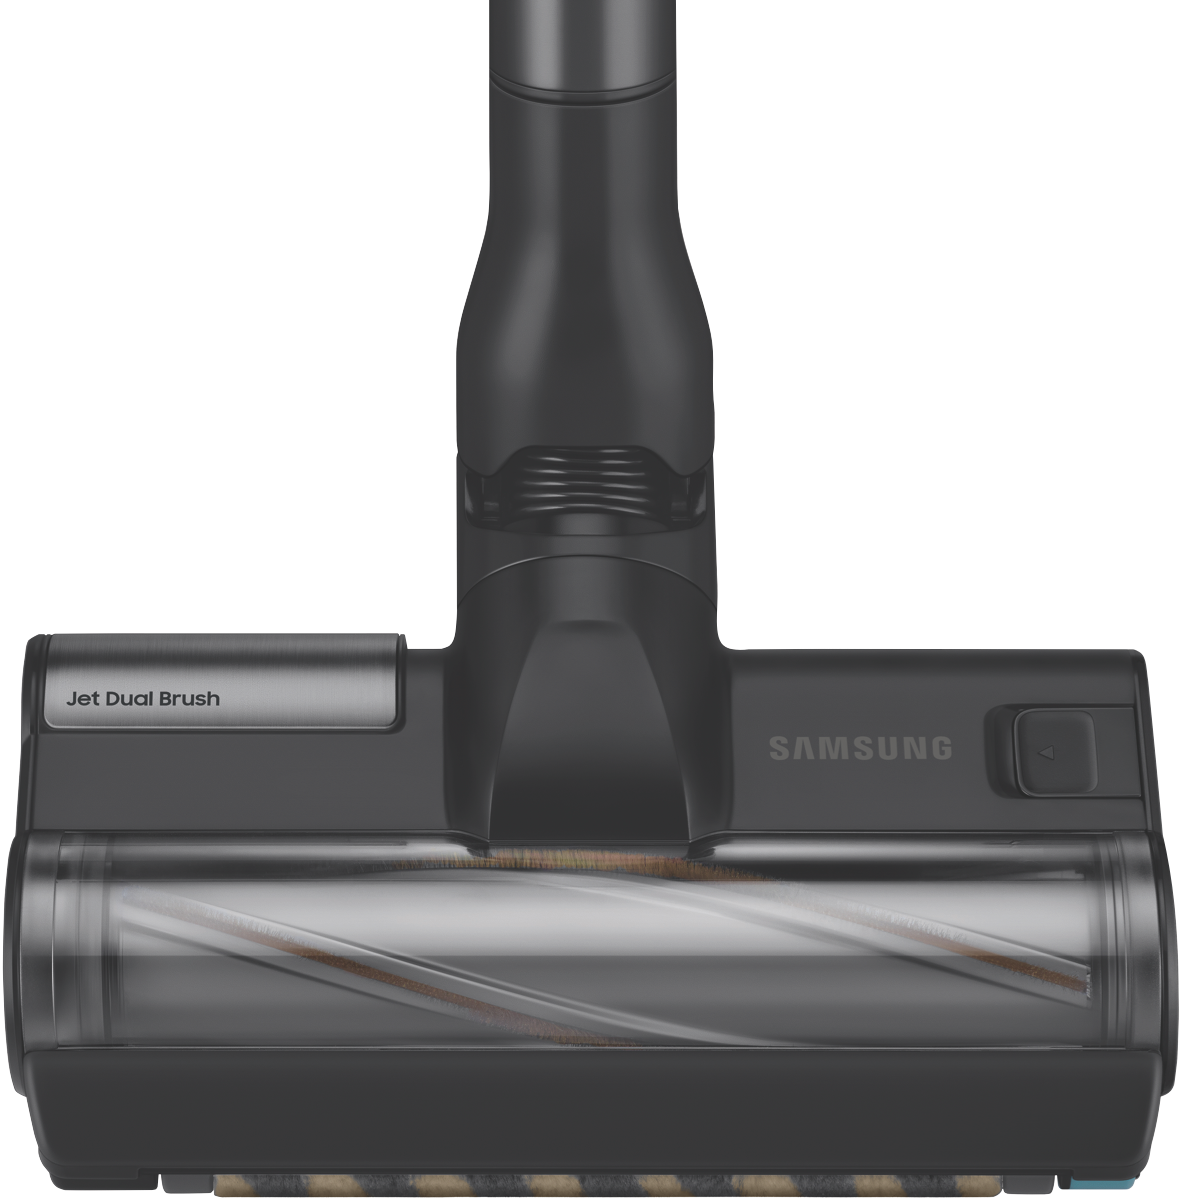 Samsung BESPOKE Jet Complete Extra Cordless Vacuum Cleaner VS20A95943B